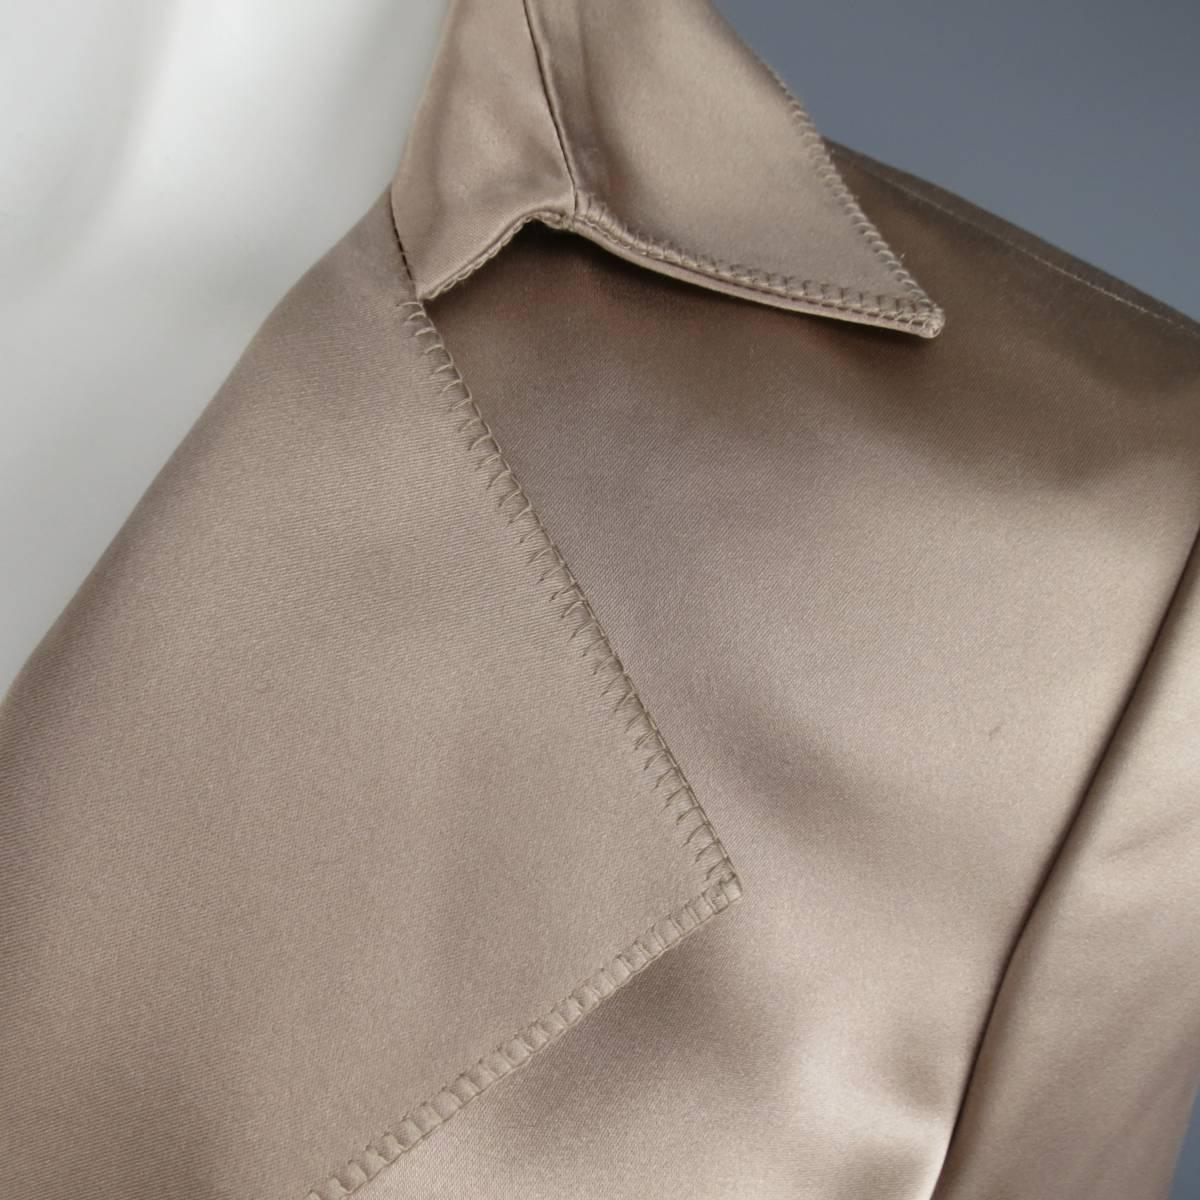 Archival YVES SANT LAURENT Rive Gauche suit in a gorgeous muted nude beige silk satin includes a three button jacket with pointed lapel, flap pockets, satin buttons, and zig zag stitch hem details throughout with a matching pencil skirt. Minor